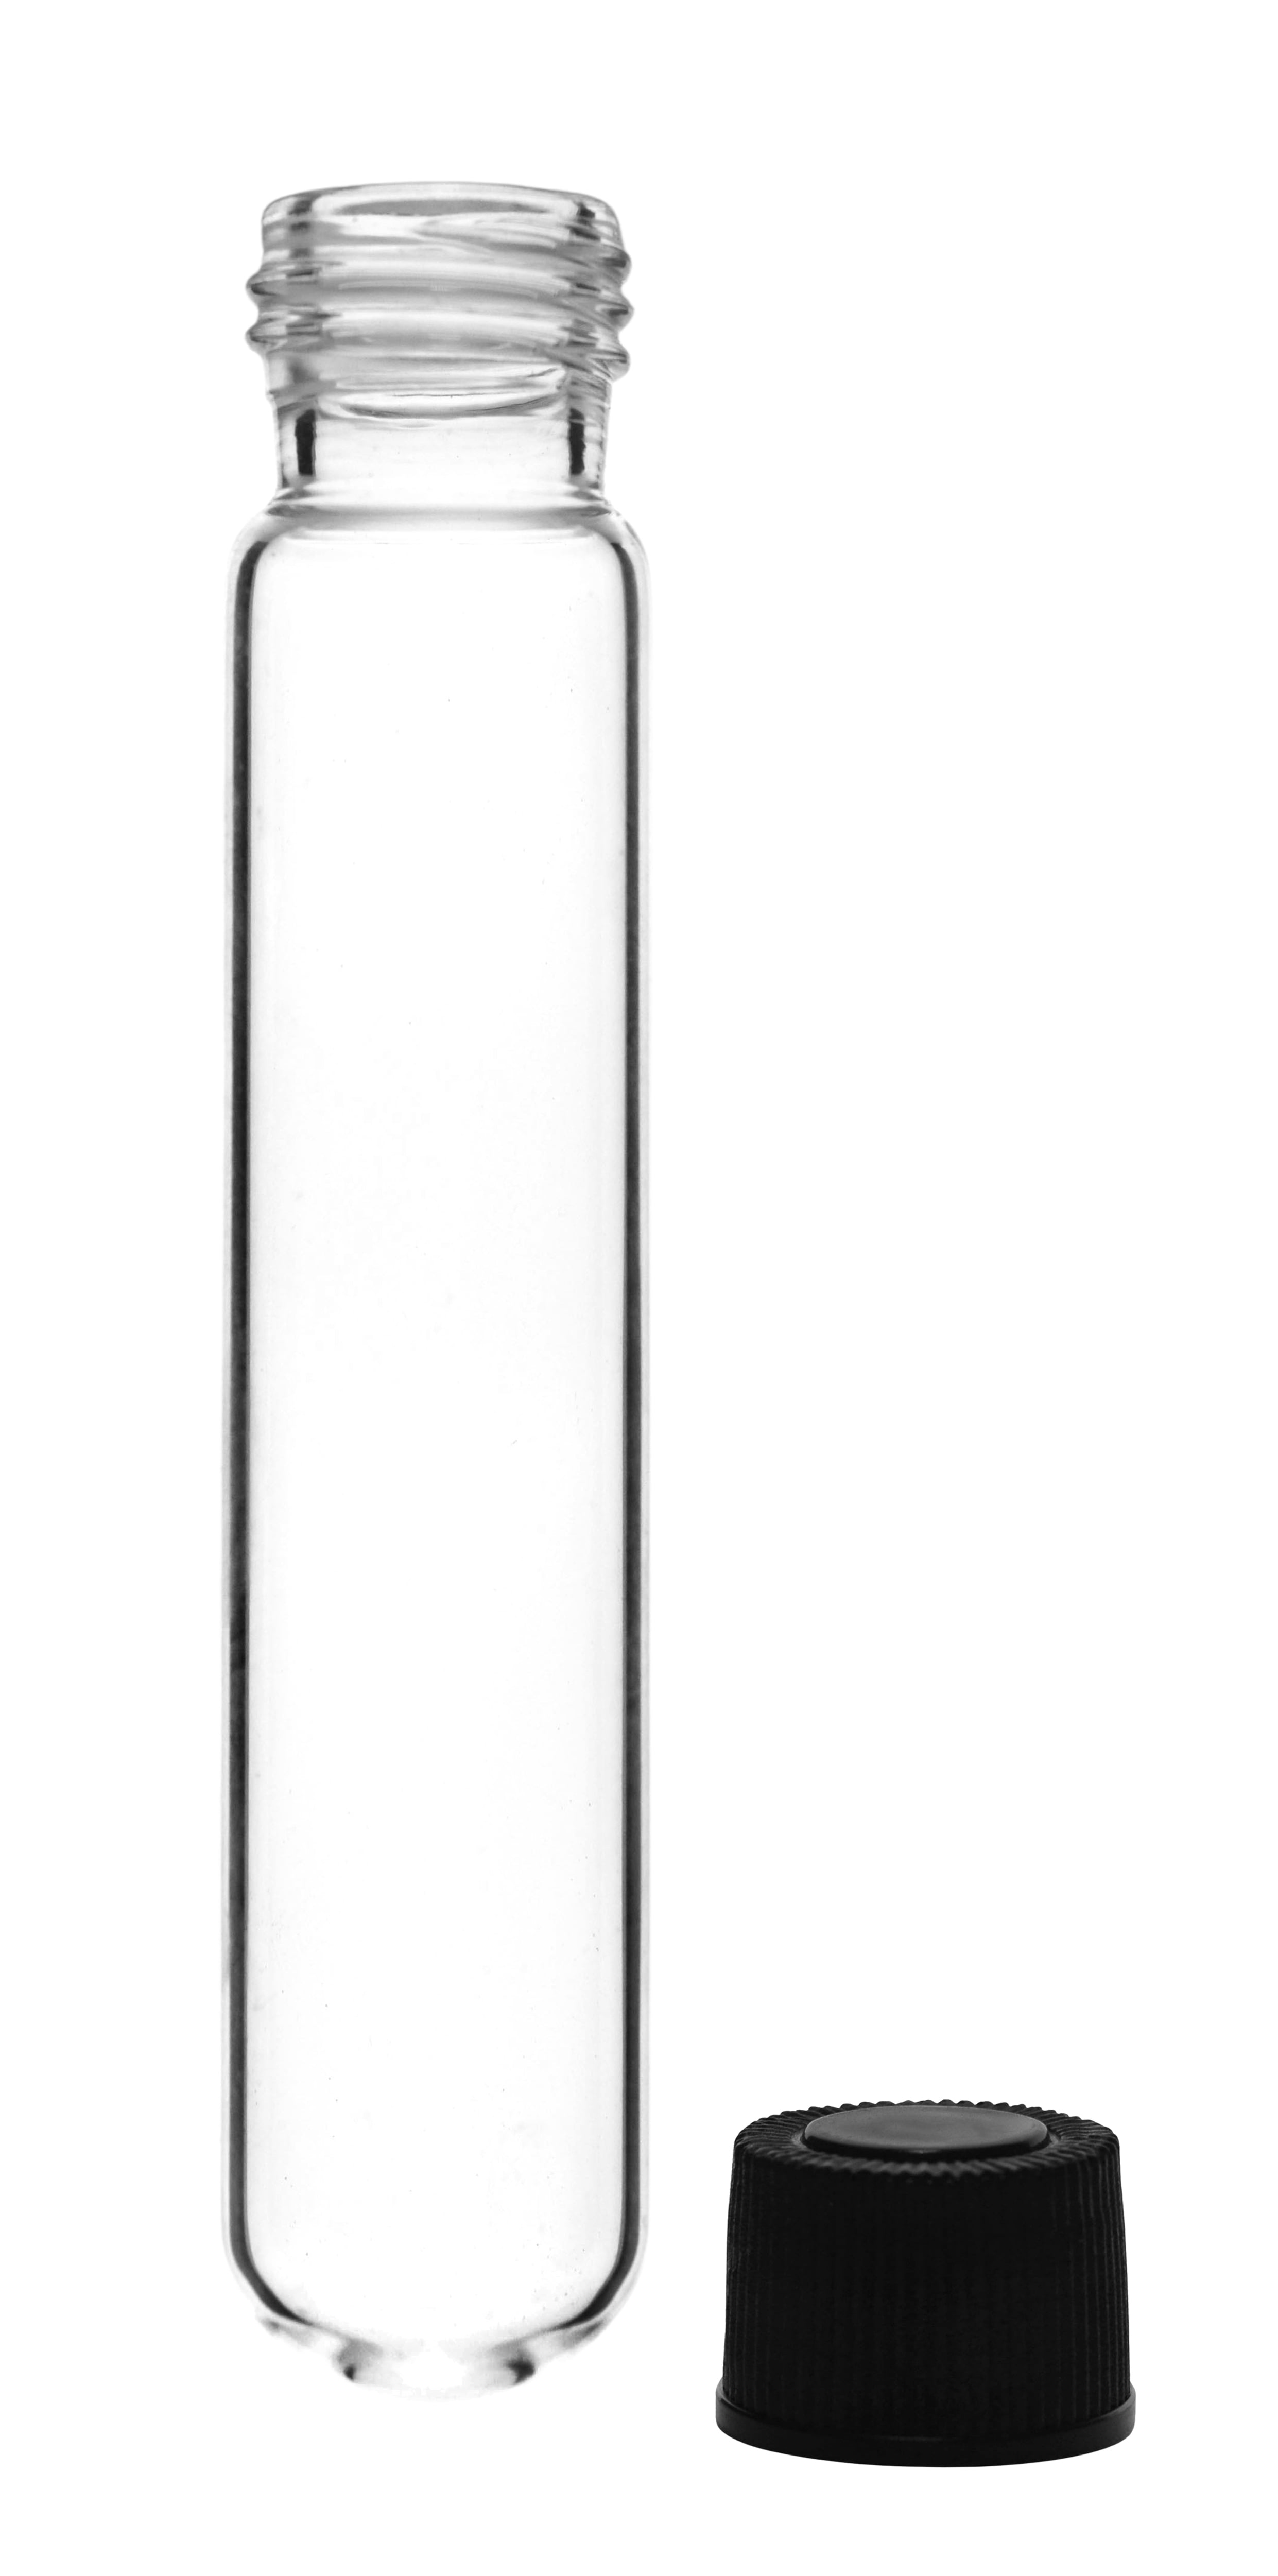 4.125 Height Eisco Labs Rimmed Borosilicate Glass Test Tube 12 x 100mm Pack of 48 